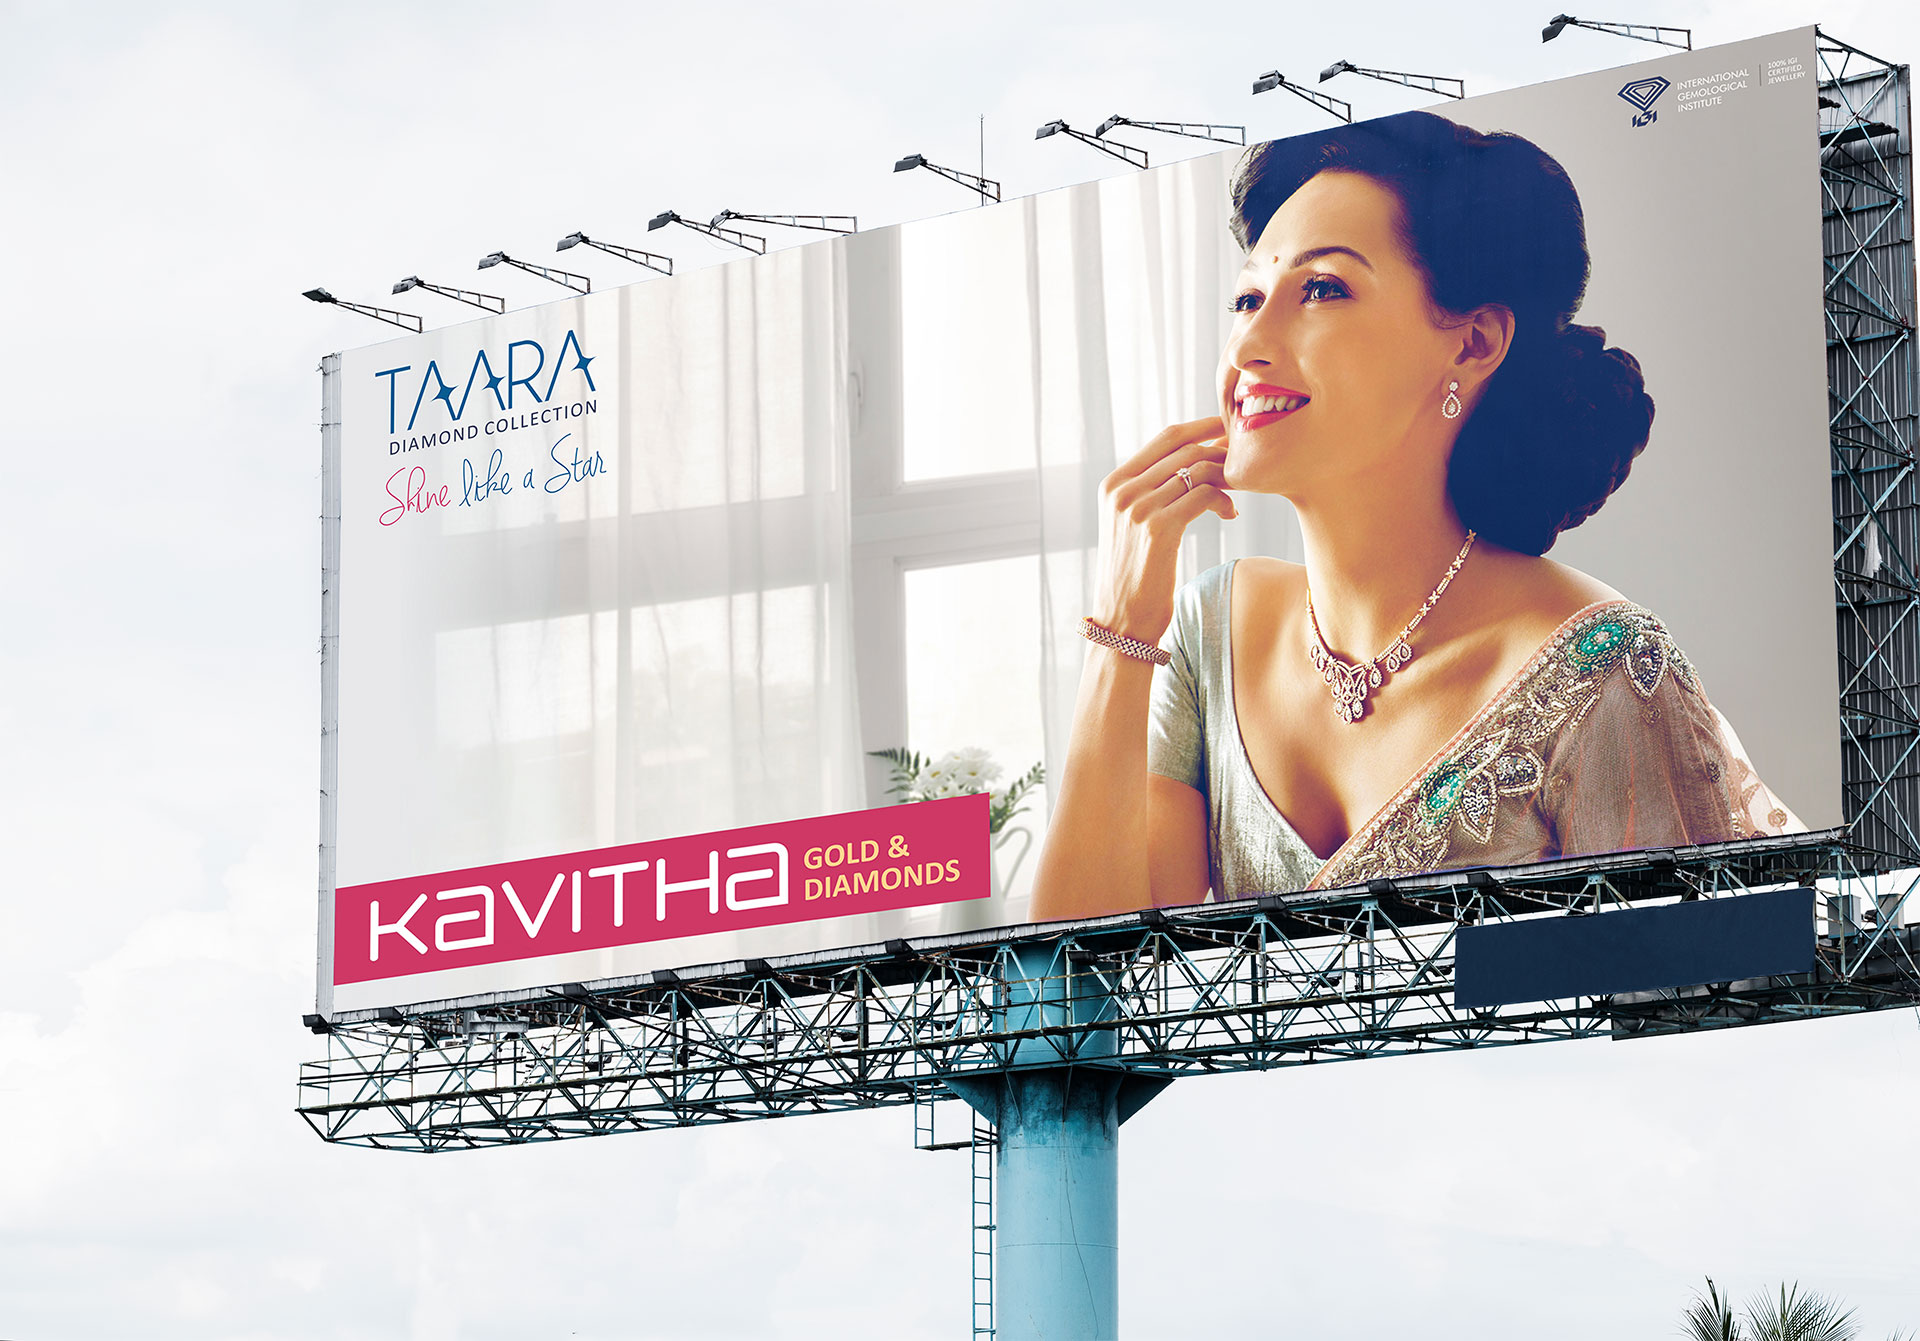 A bill board displays the Taara Diamonds collections from Kavitha Gold & Diamonds